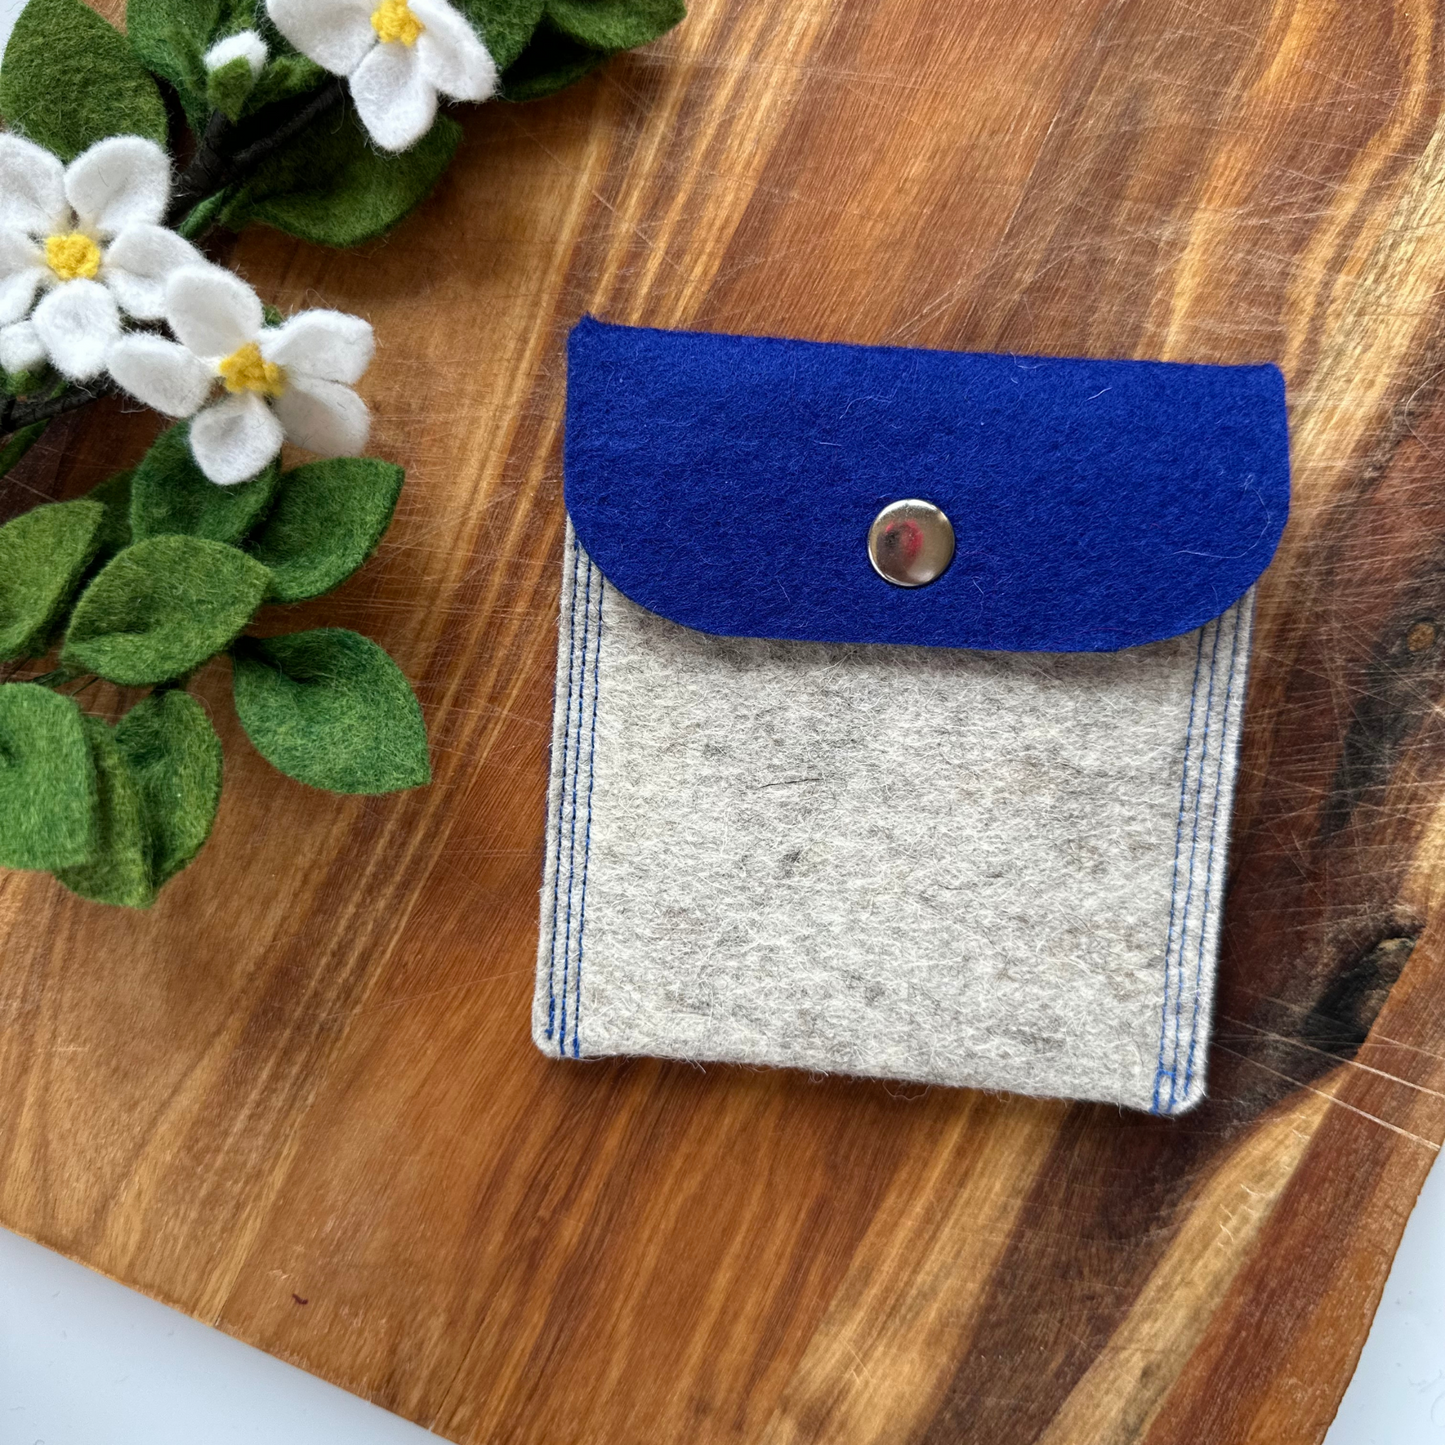 Blue and natural beige felt pouch